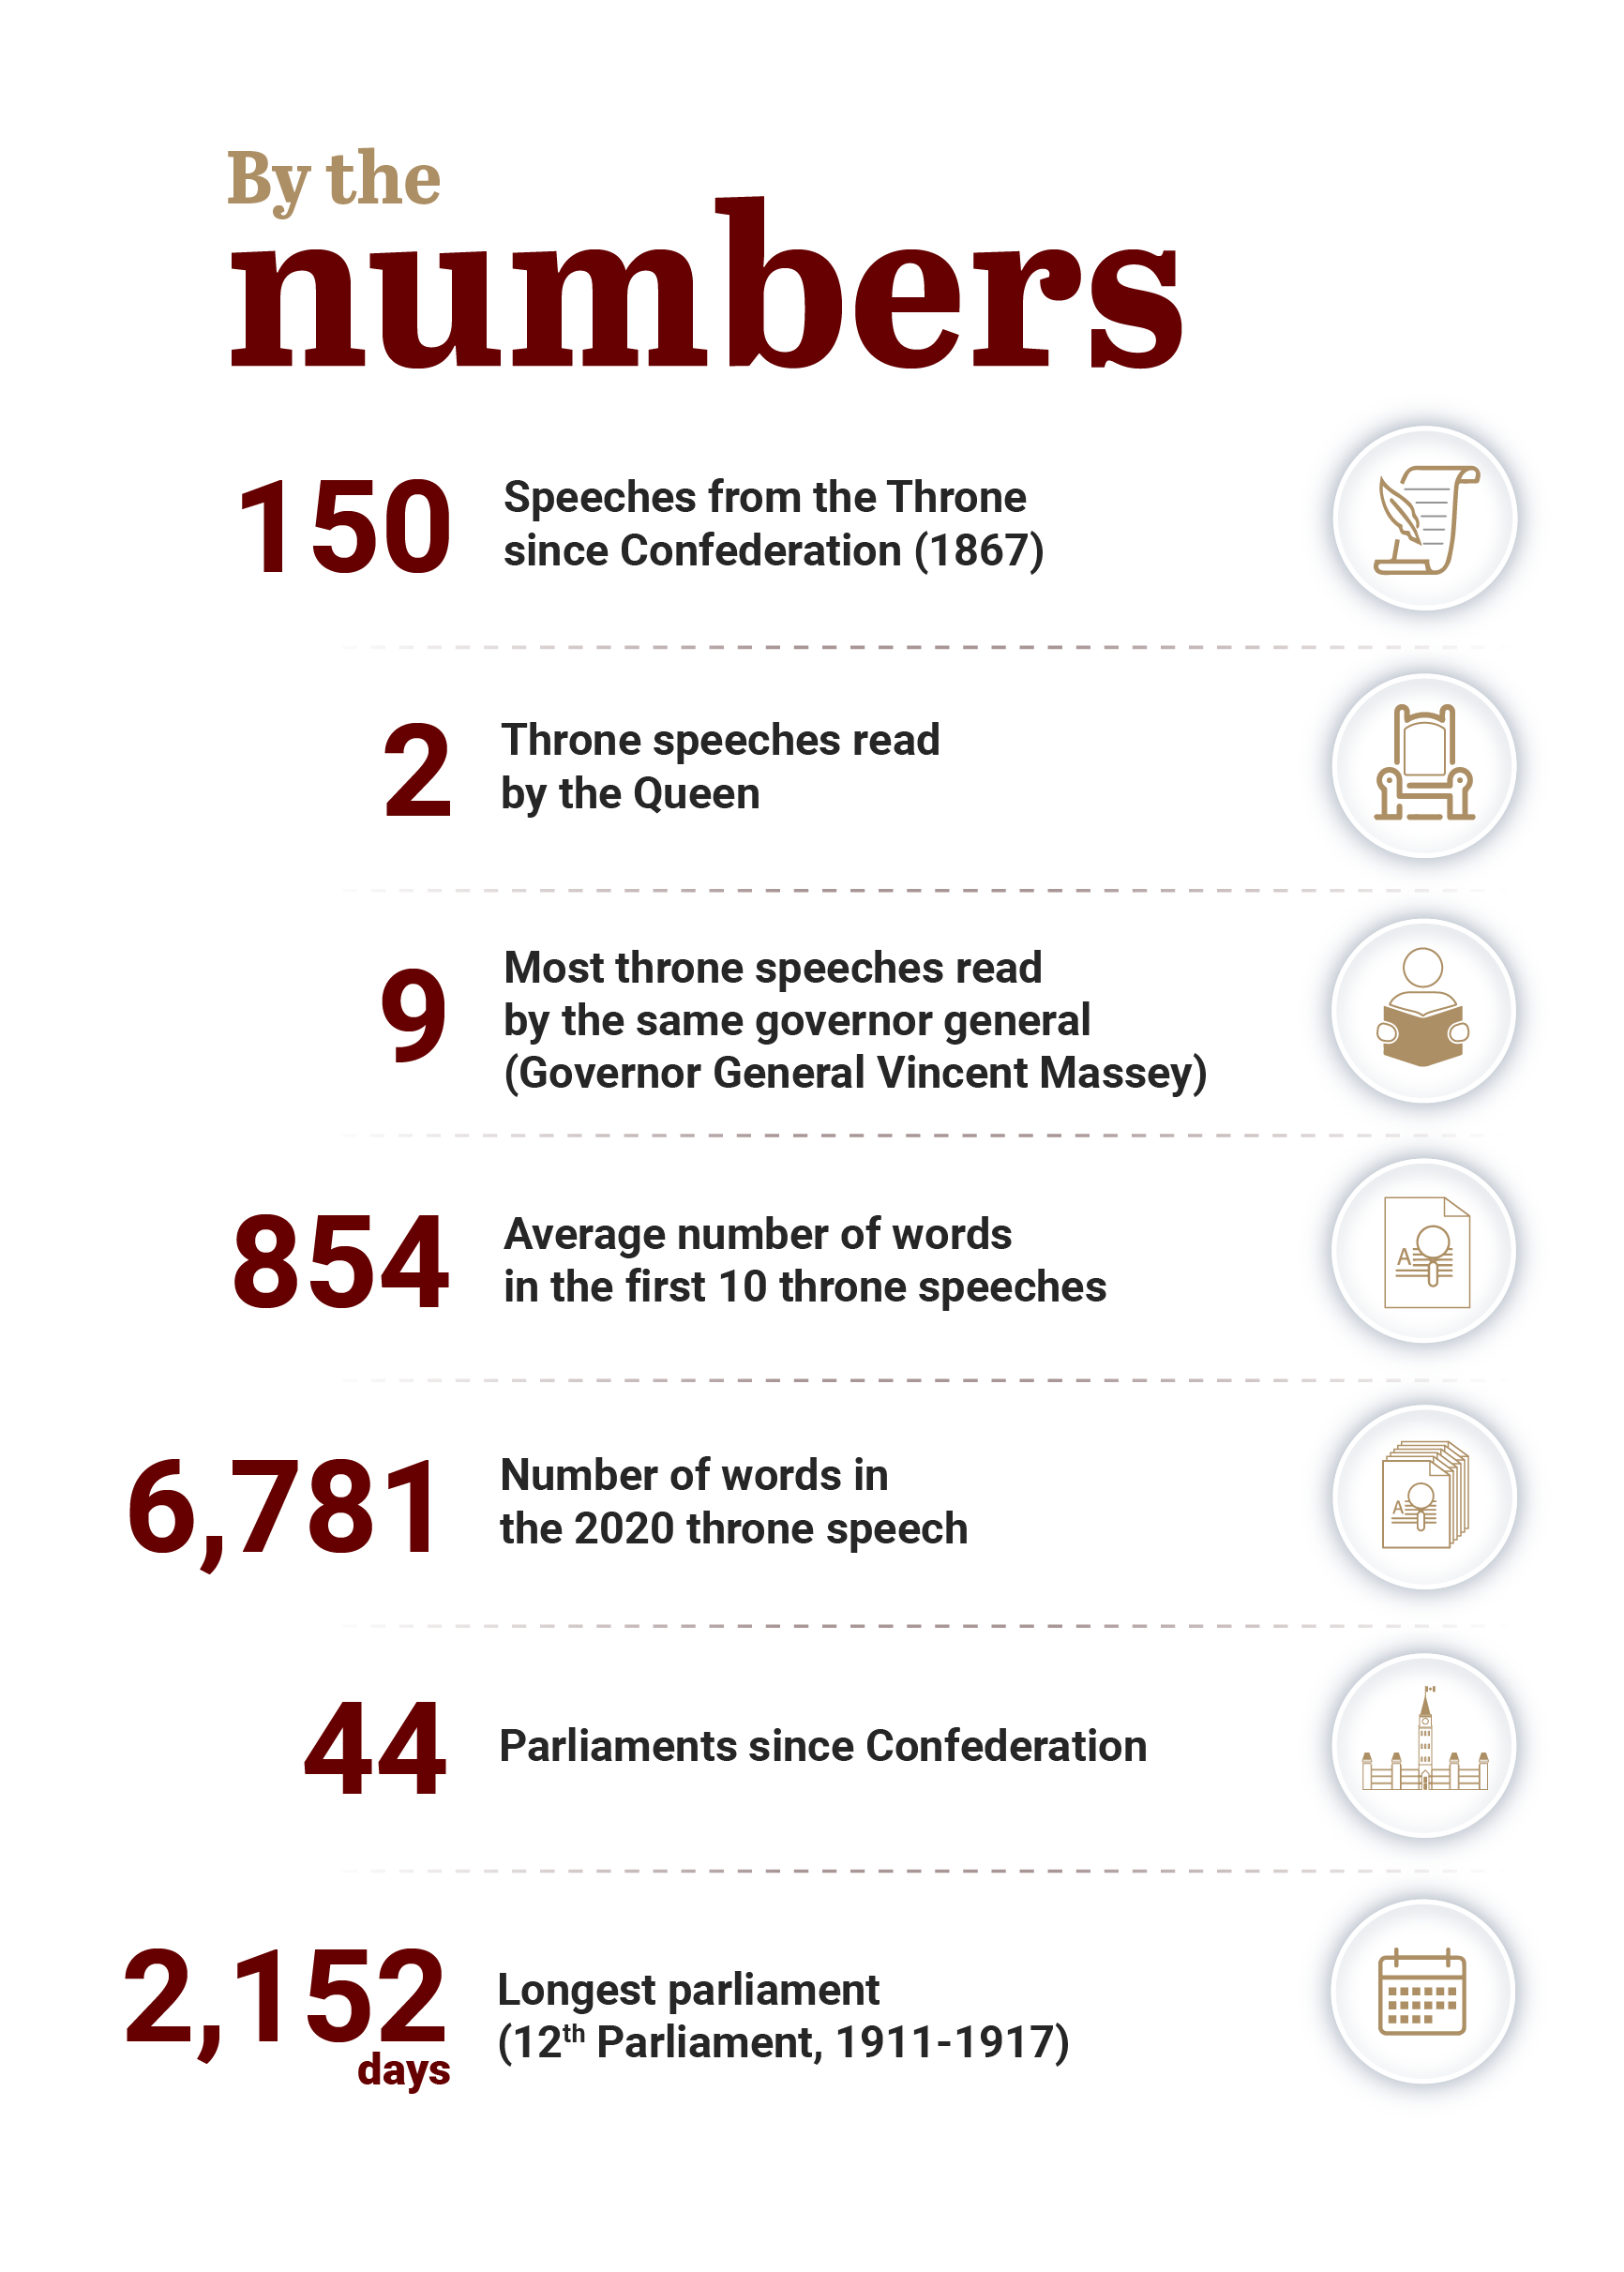 Speech from the throne by the numbers